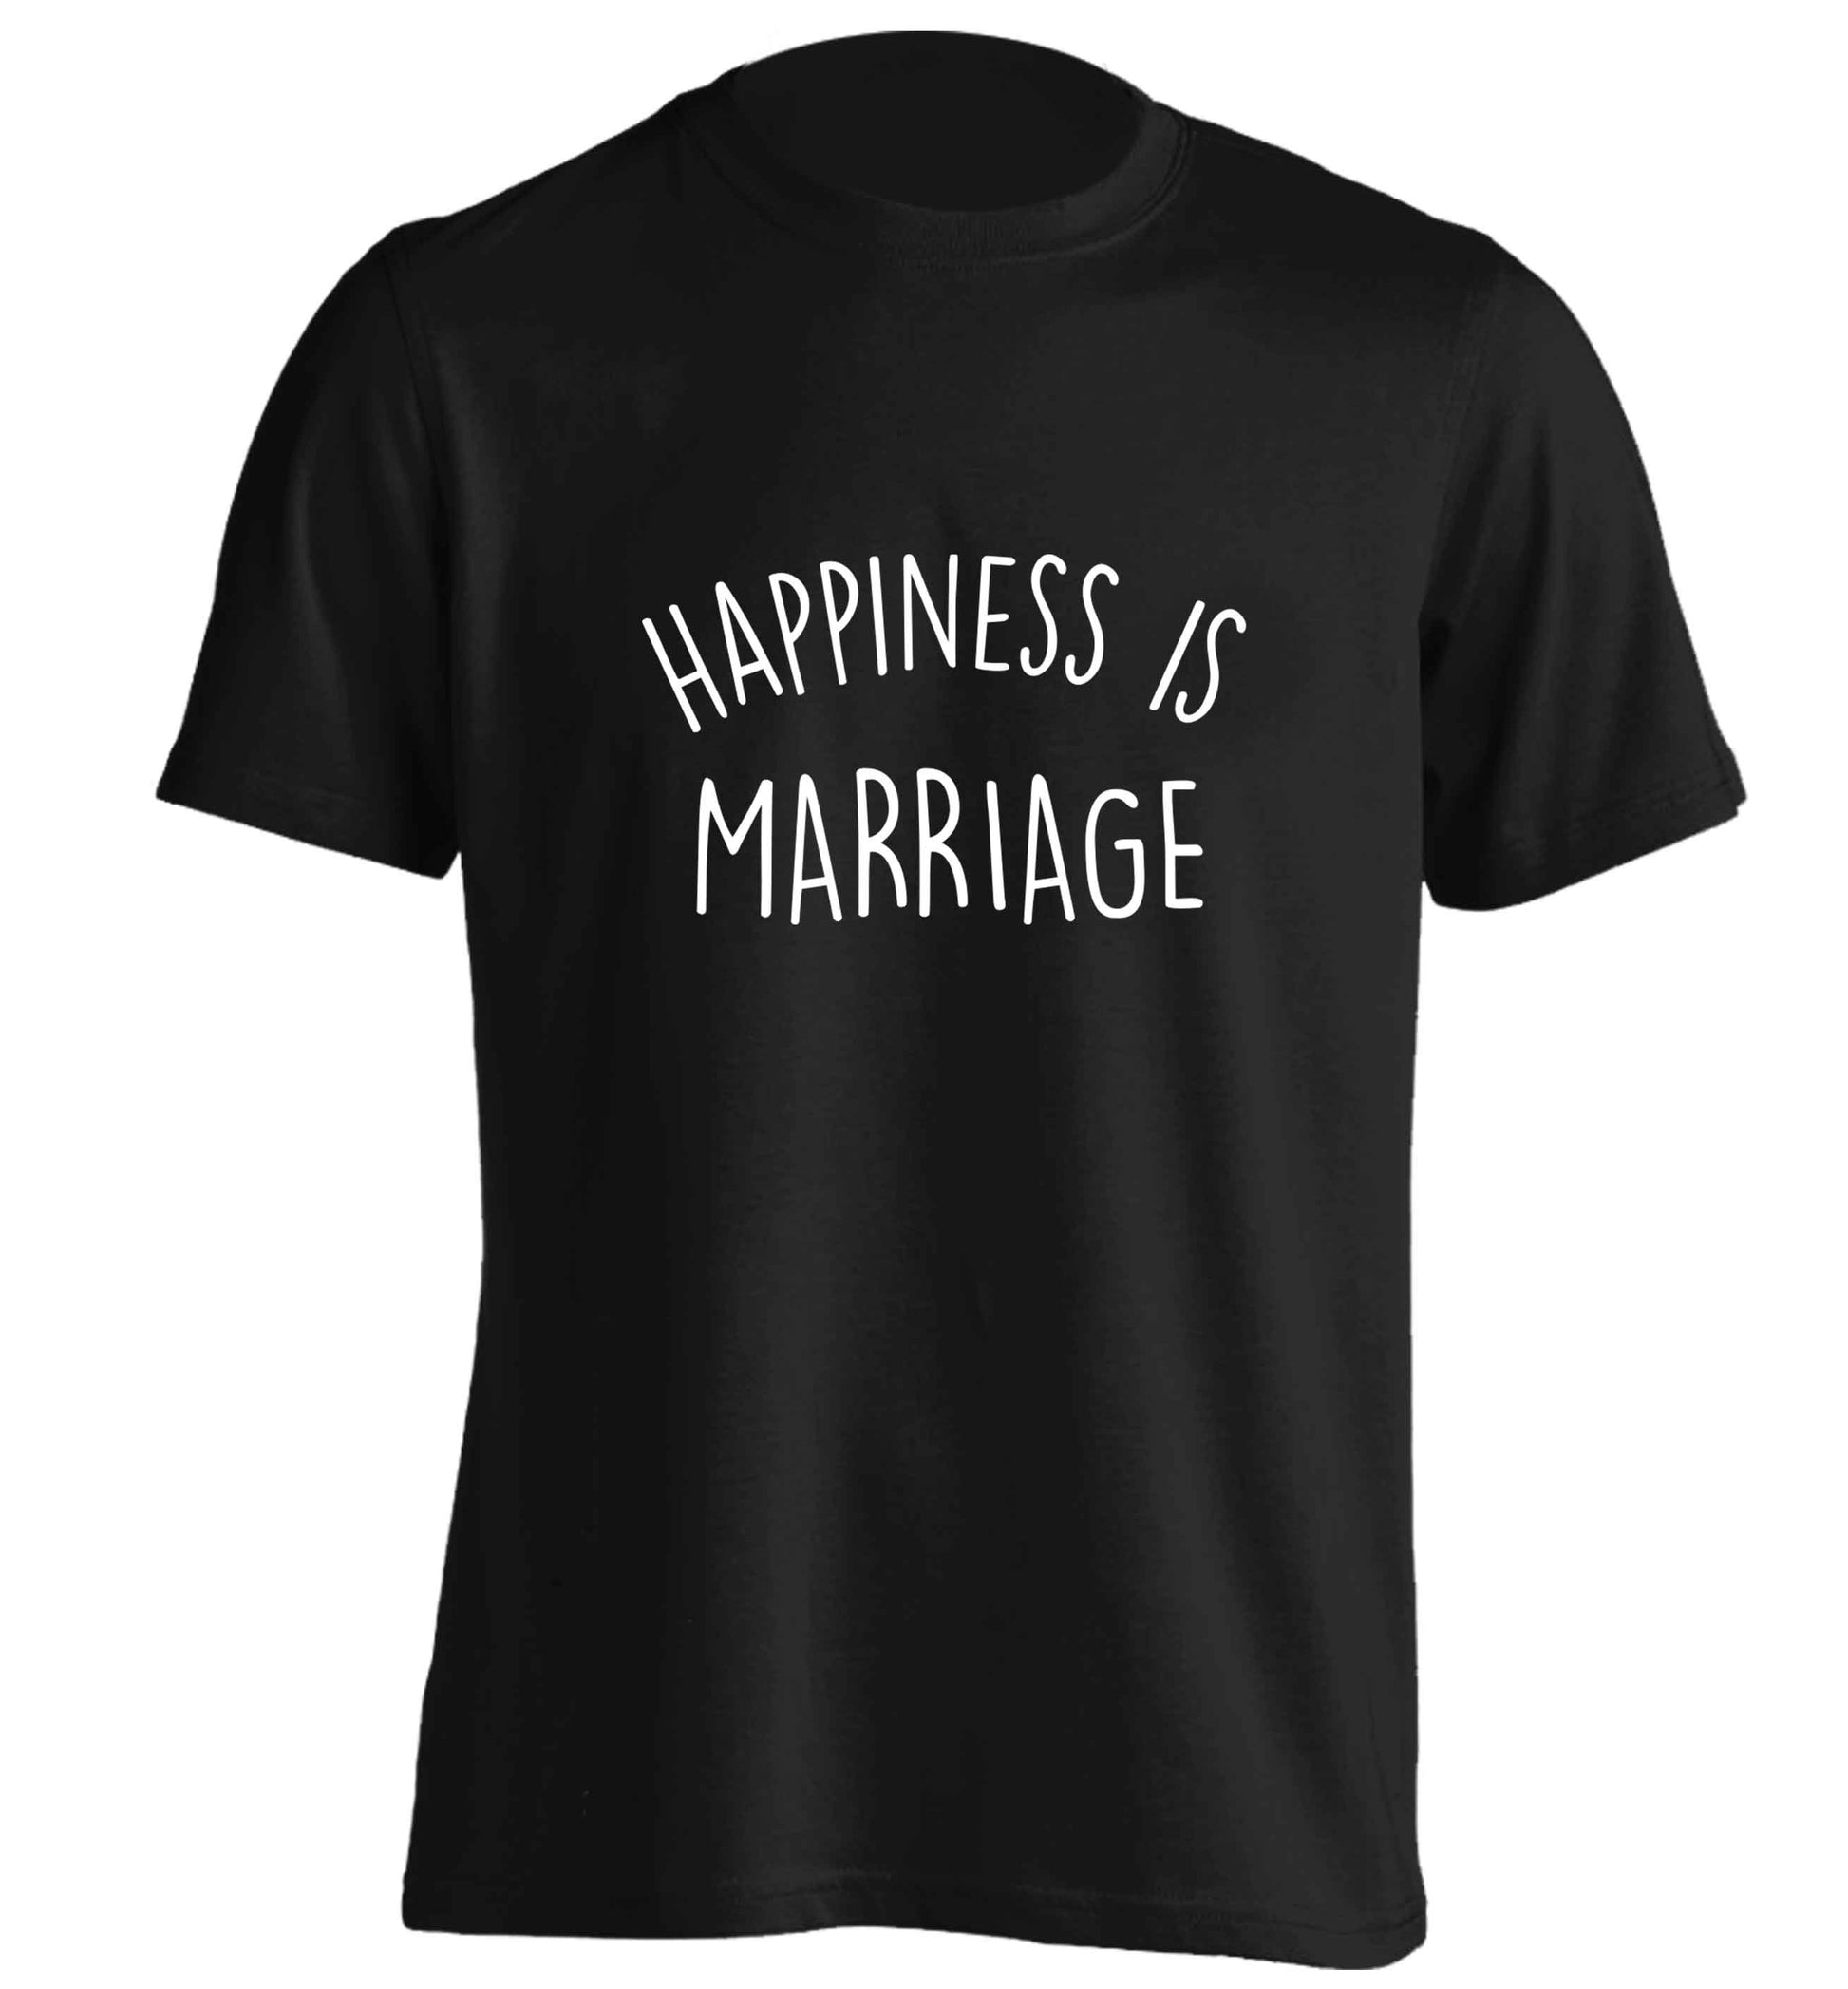 Happiness is marriage adults unisex black Tshirt 2XL